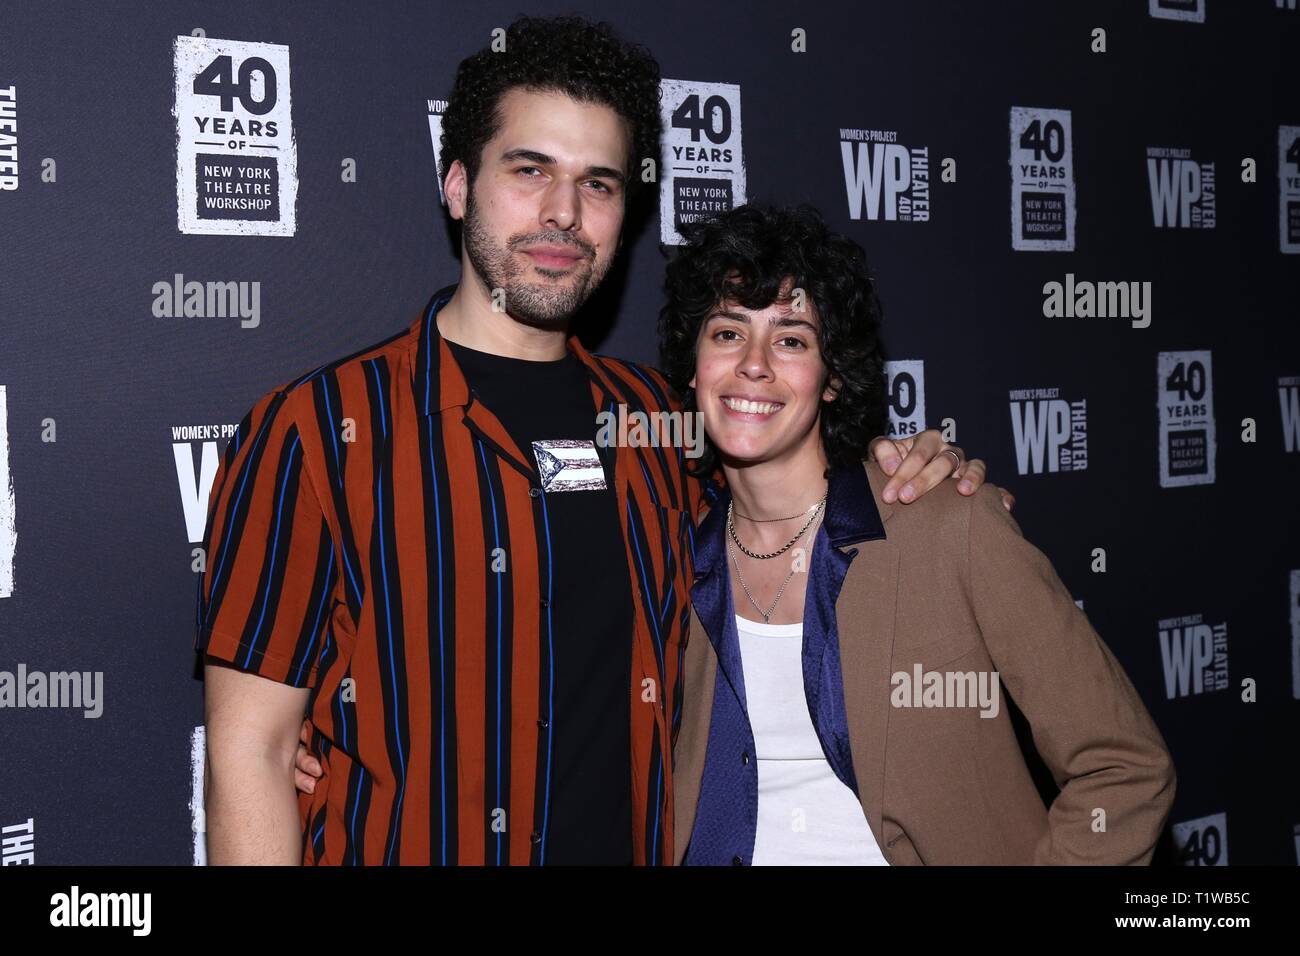 Opening night party for the play Hurricane Diane held at Phebe's Tavern and Grill - Arrivals.  Featuring: Joél Pérez, Roberta Colindrez Where: New York, New York, United States When: 25 Feb 2019 Credit: Joseph Marzullo/WENN.com Stock Photo